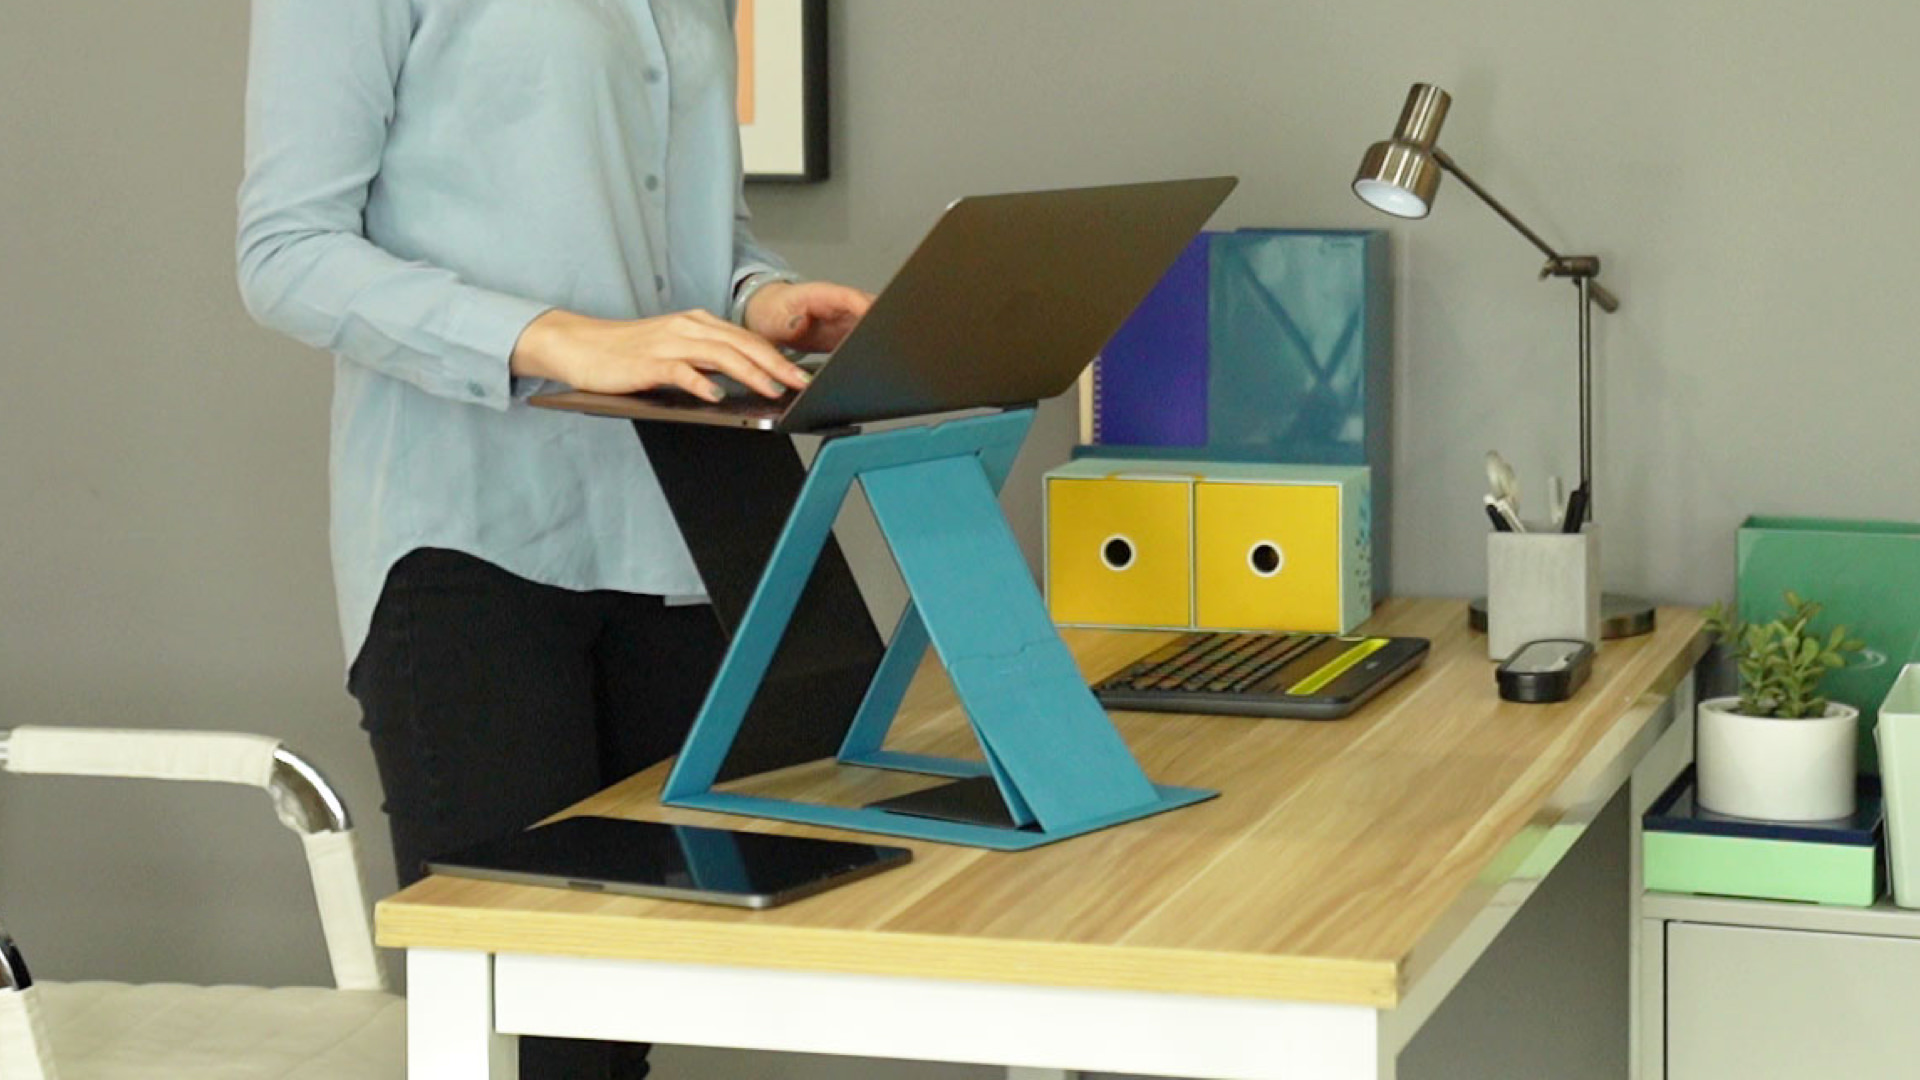 The Moft Z Is A Super Portable Standing Desk That S Hitting